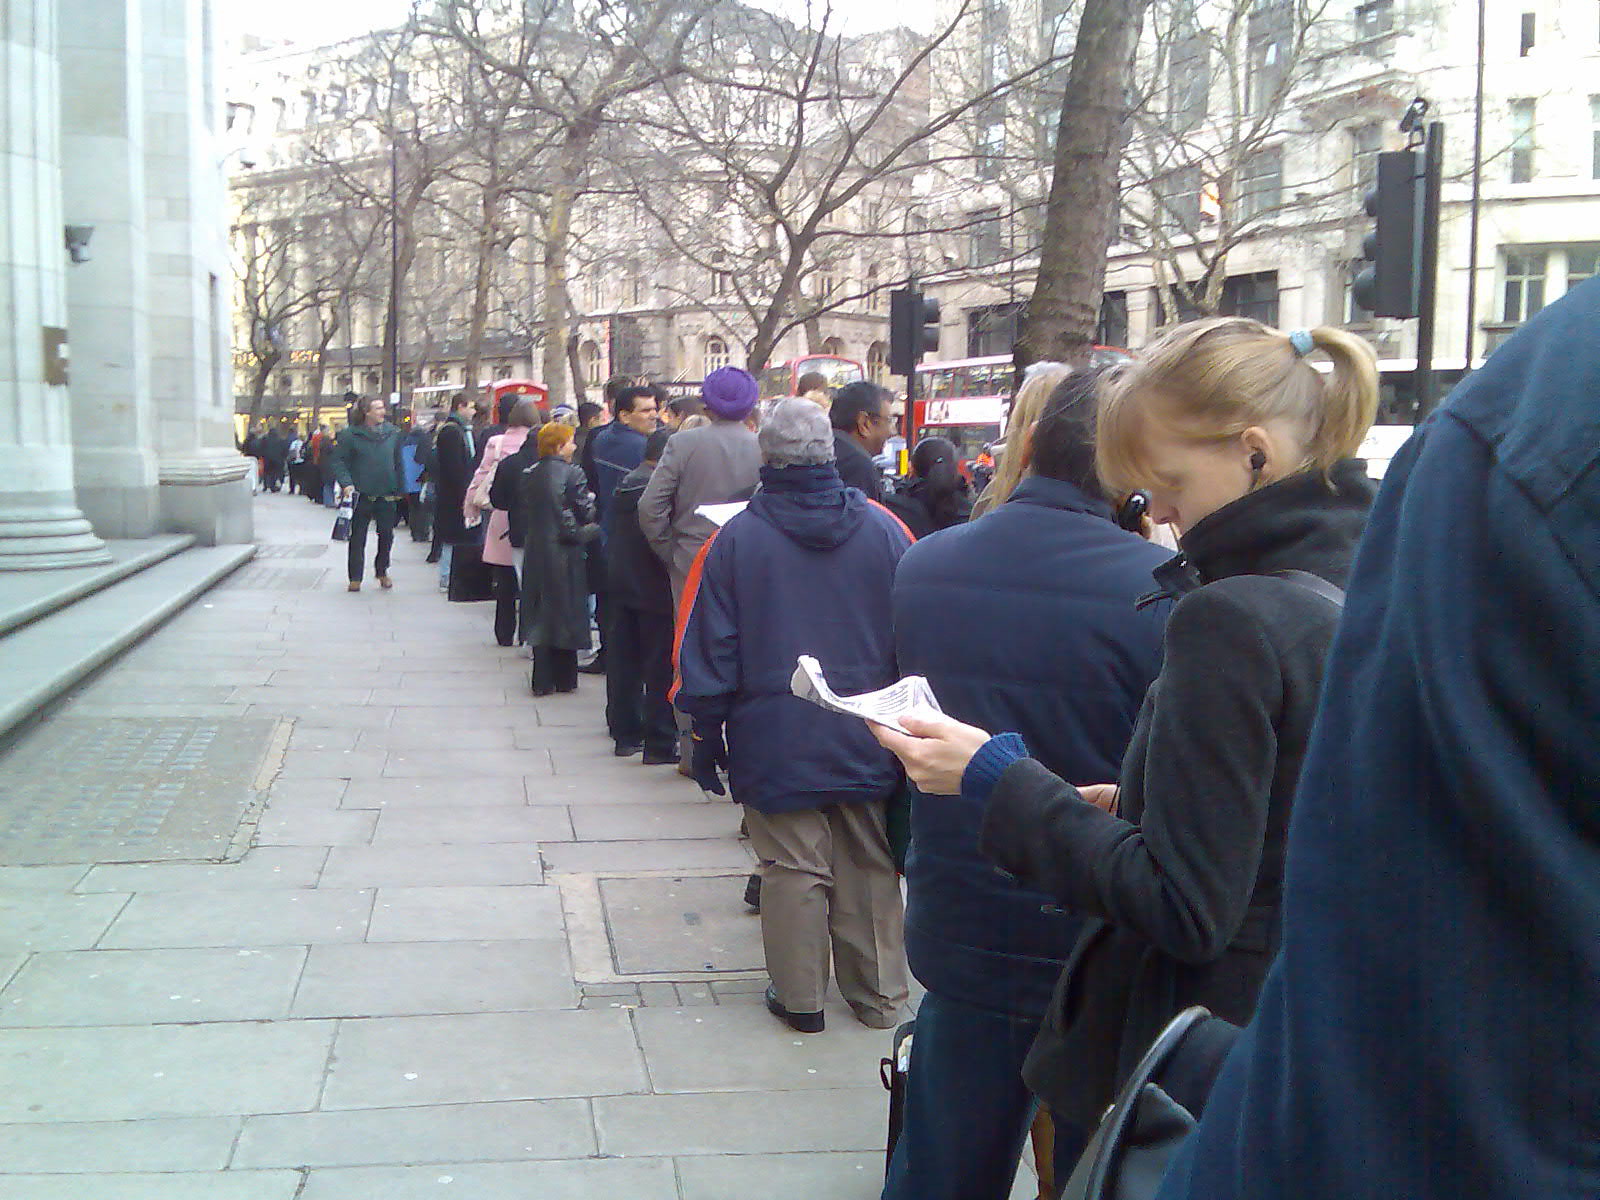 The visa queue at the Indian High Commission, London